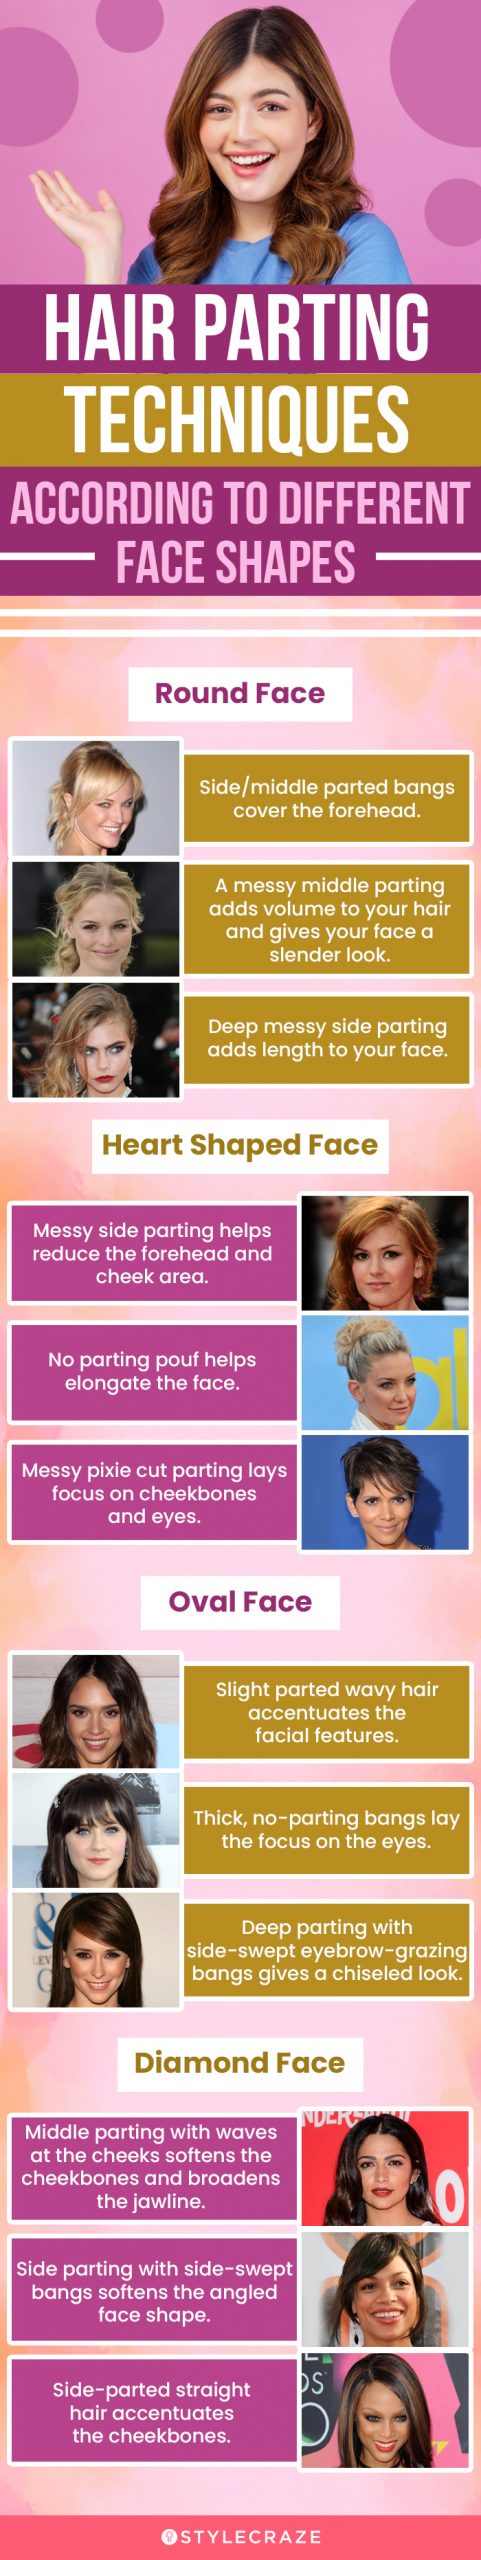 hair parting techniques according to different face shapes (infographic)